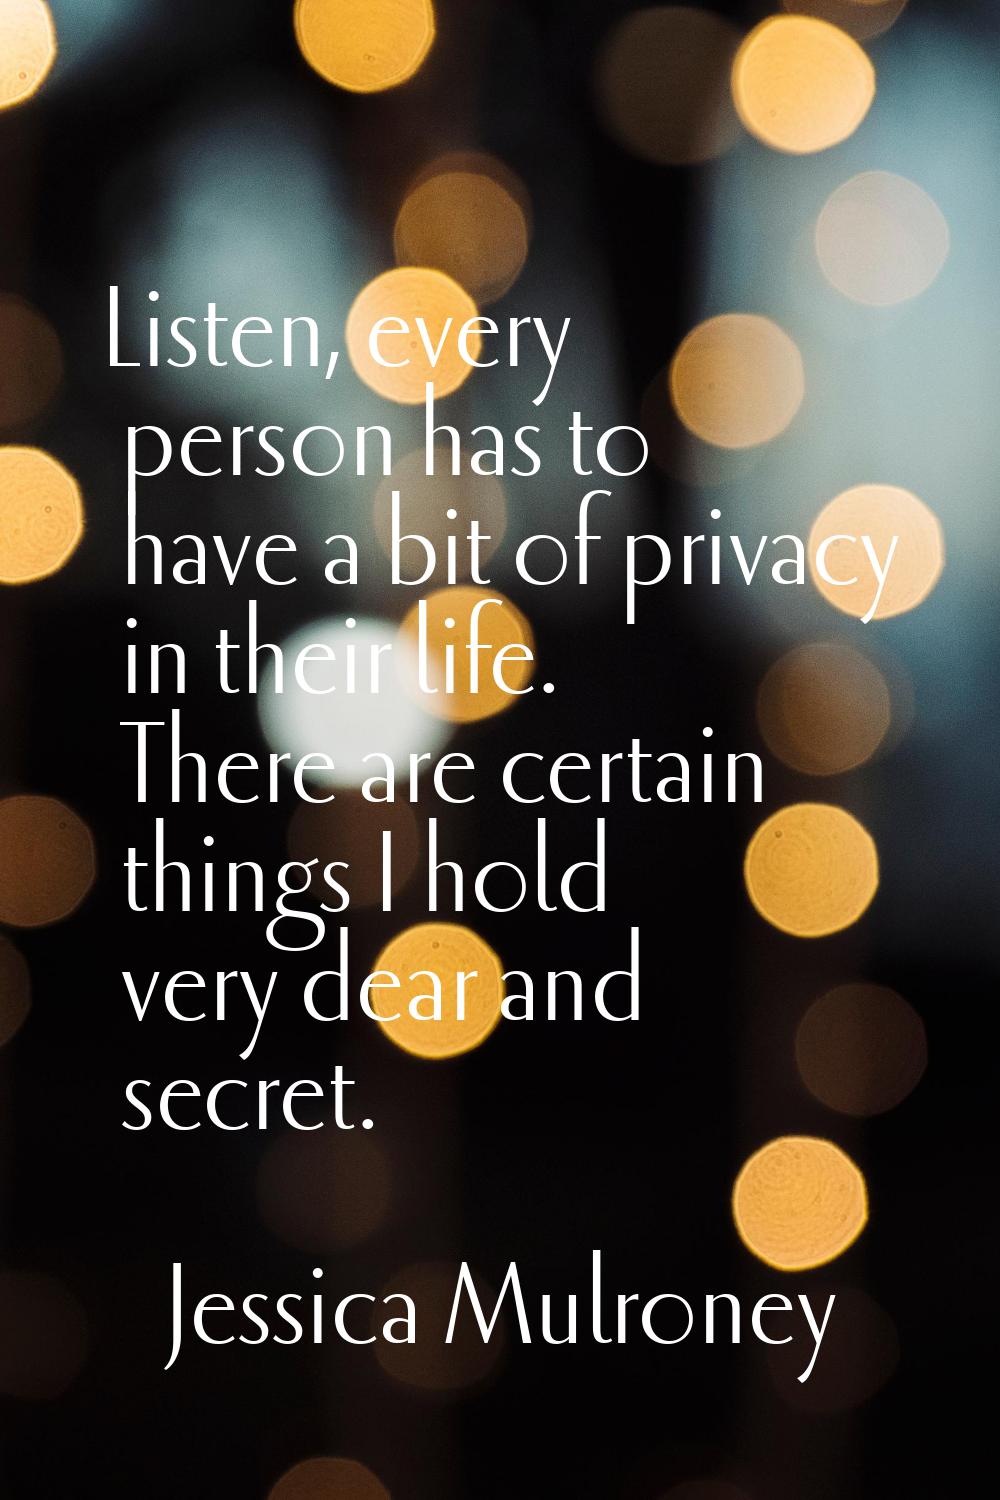 Listen, every person has to have a bit of privacy in their life. There are certain things I hold ve